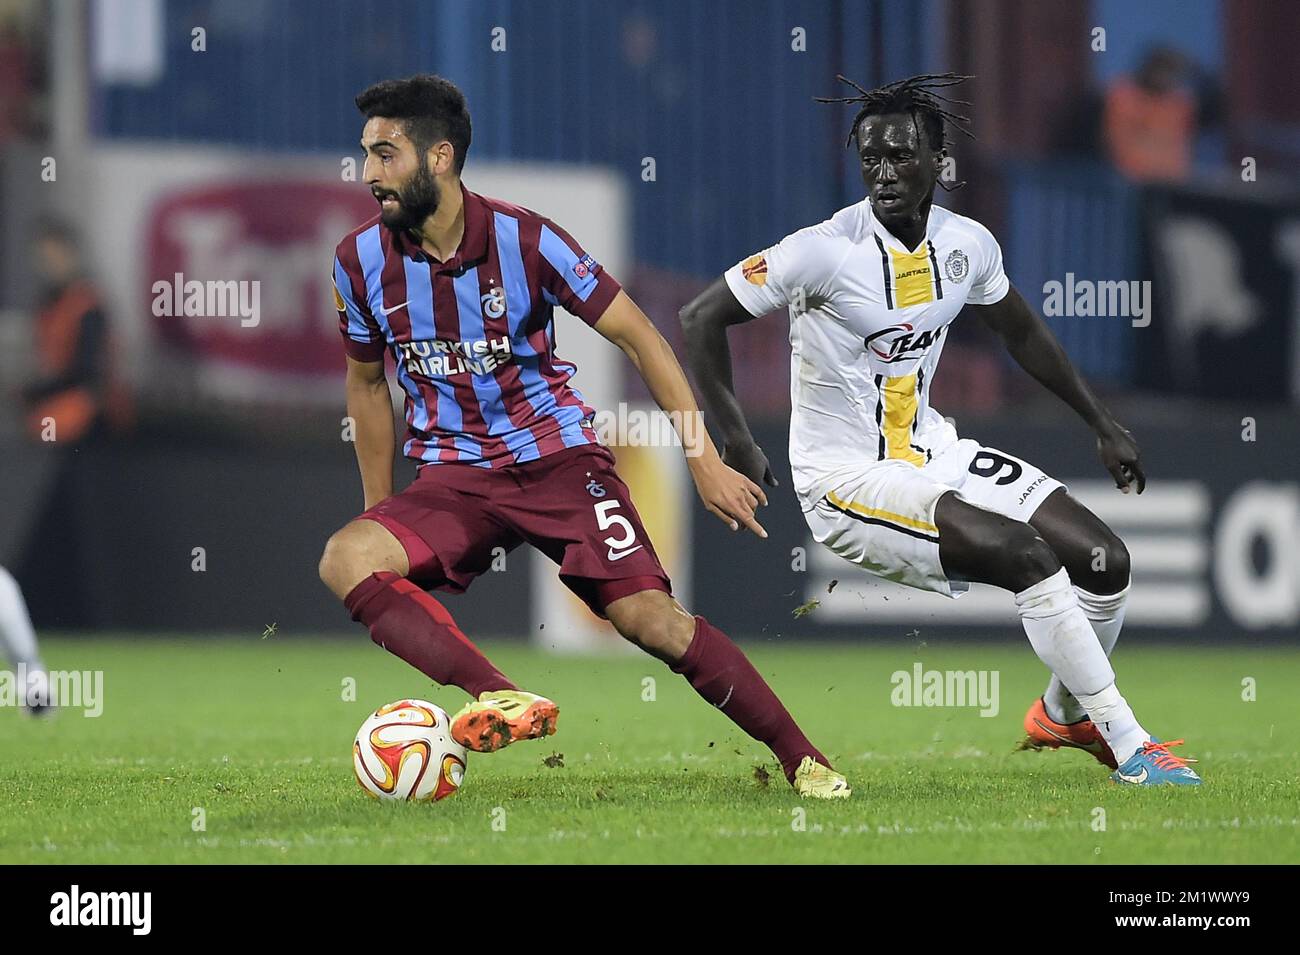 20141023 - TRABZON, TURKEY: Trabzonspor's Mehmet Ekici and Lokeren's Mbaye Leye fight for the ball during a game between Turkish club Trabzonspor AS and Belgian soccer team KSC Lokeren OVL in the Huseyin Avni Aker Stadium in Trabzon, Thursday 23 October 2014. It is the third day of the group stage of the UEFA Europa League competition, in group L. BELGA PHOTO YORICK JANSENS Stock Photo